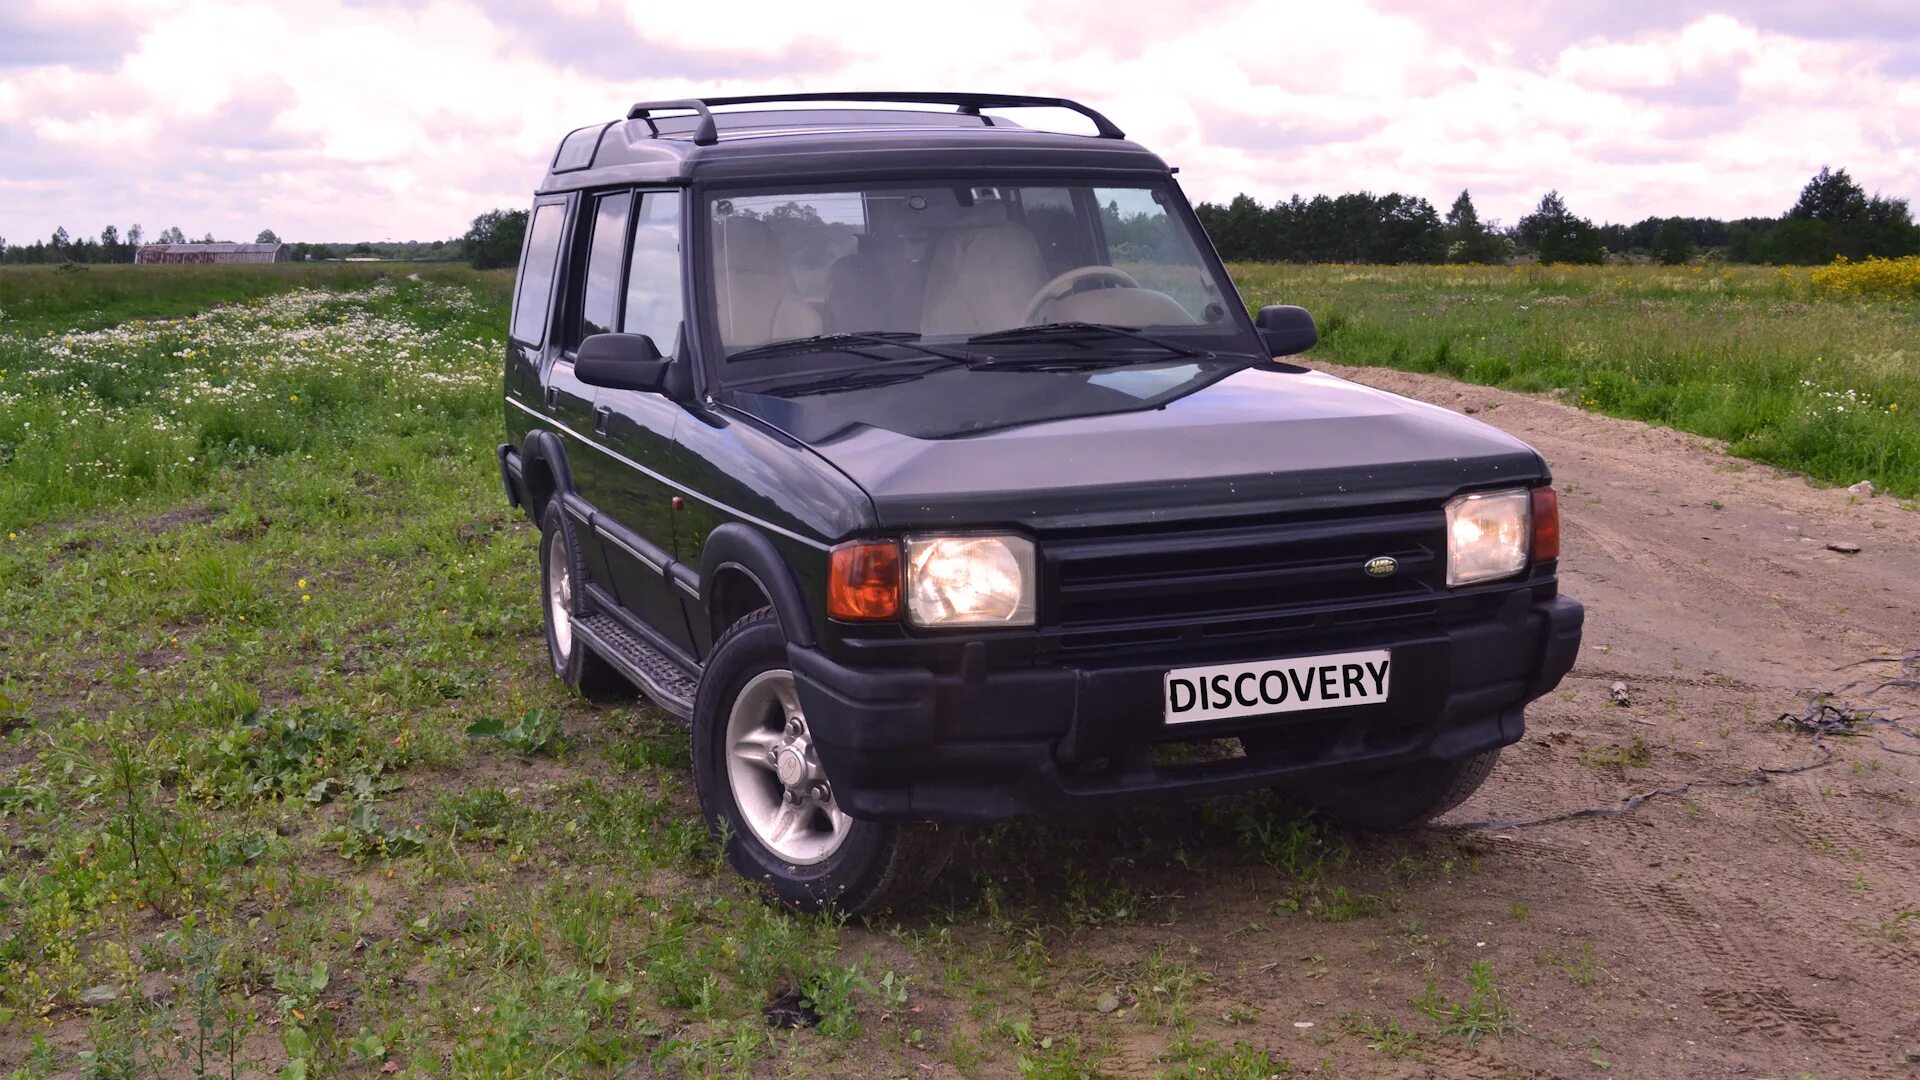 Land Rover Discovery 1996. Ленд Ровер 1996. Land Rover Discovery 1996 2.5 дизель. Range Rover Discovery 1996. Дискавери 2.5 дизель